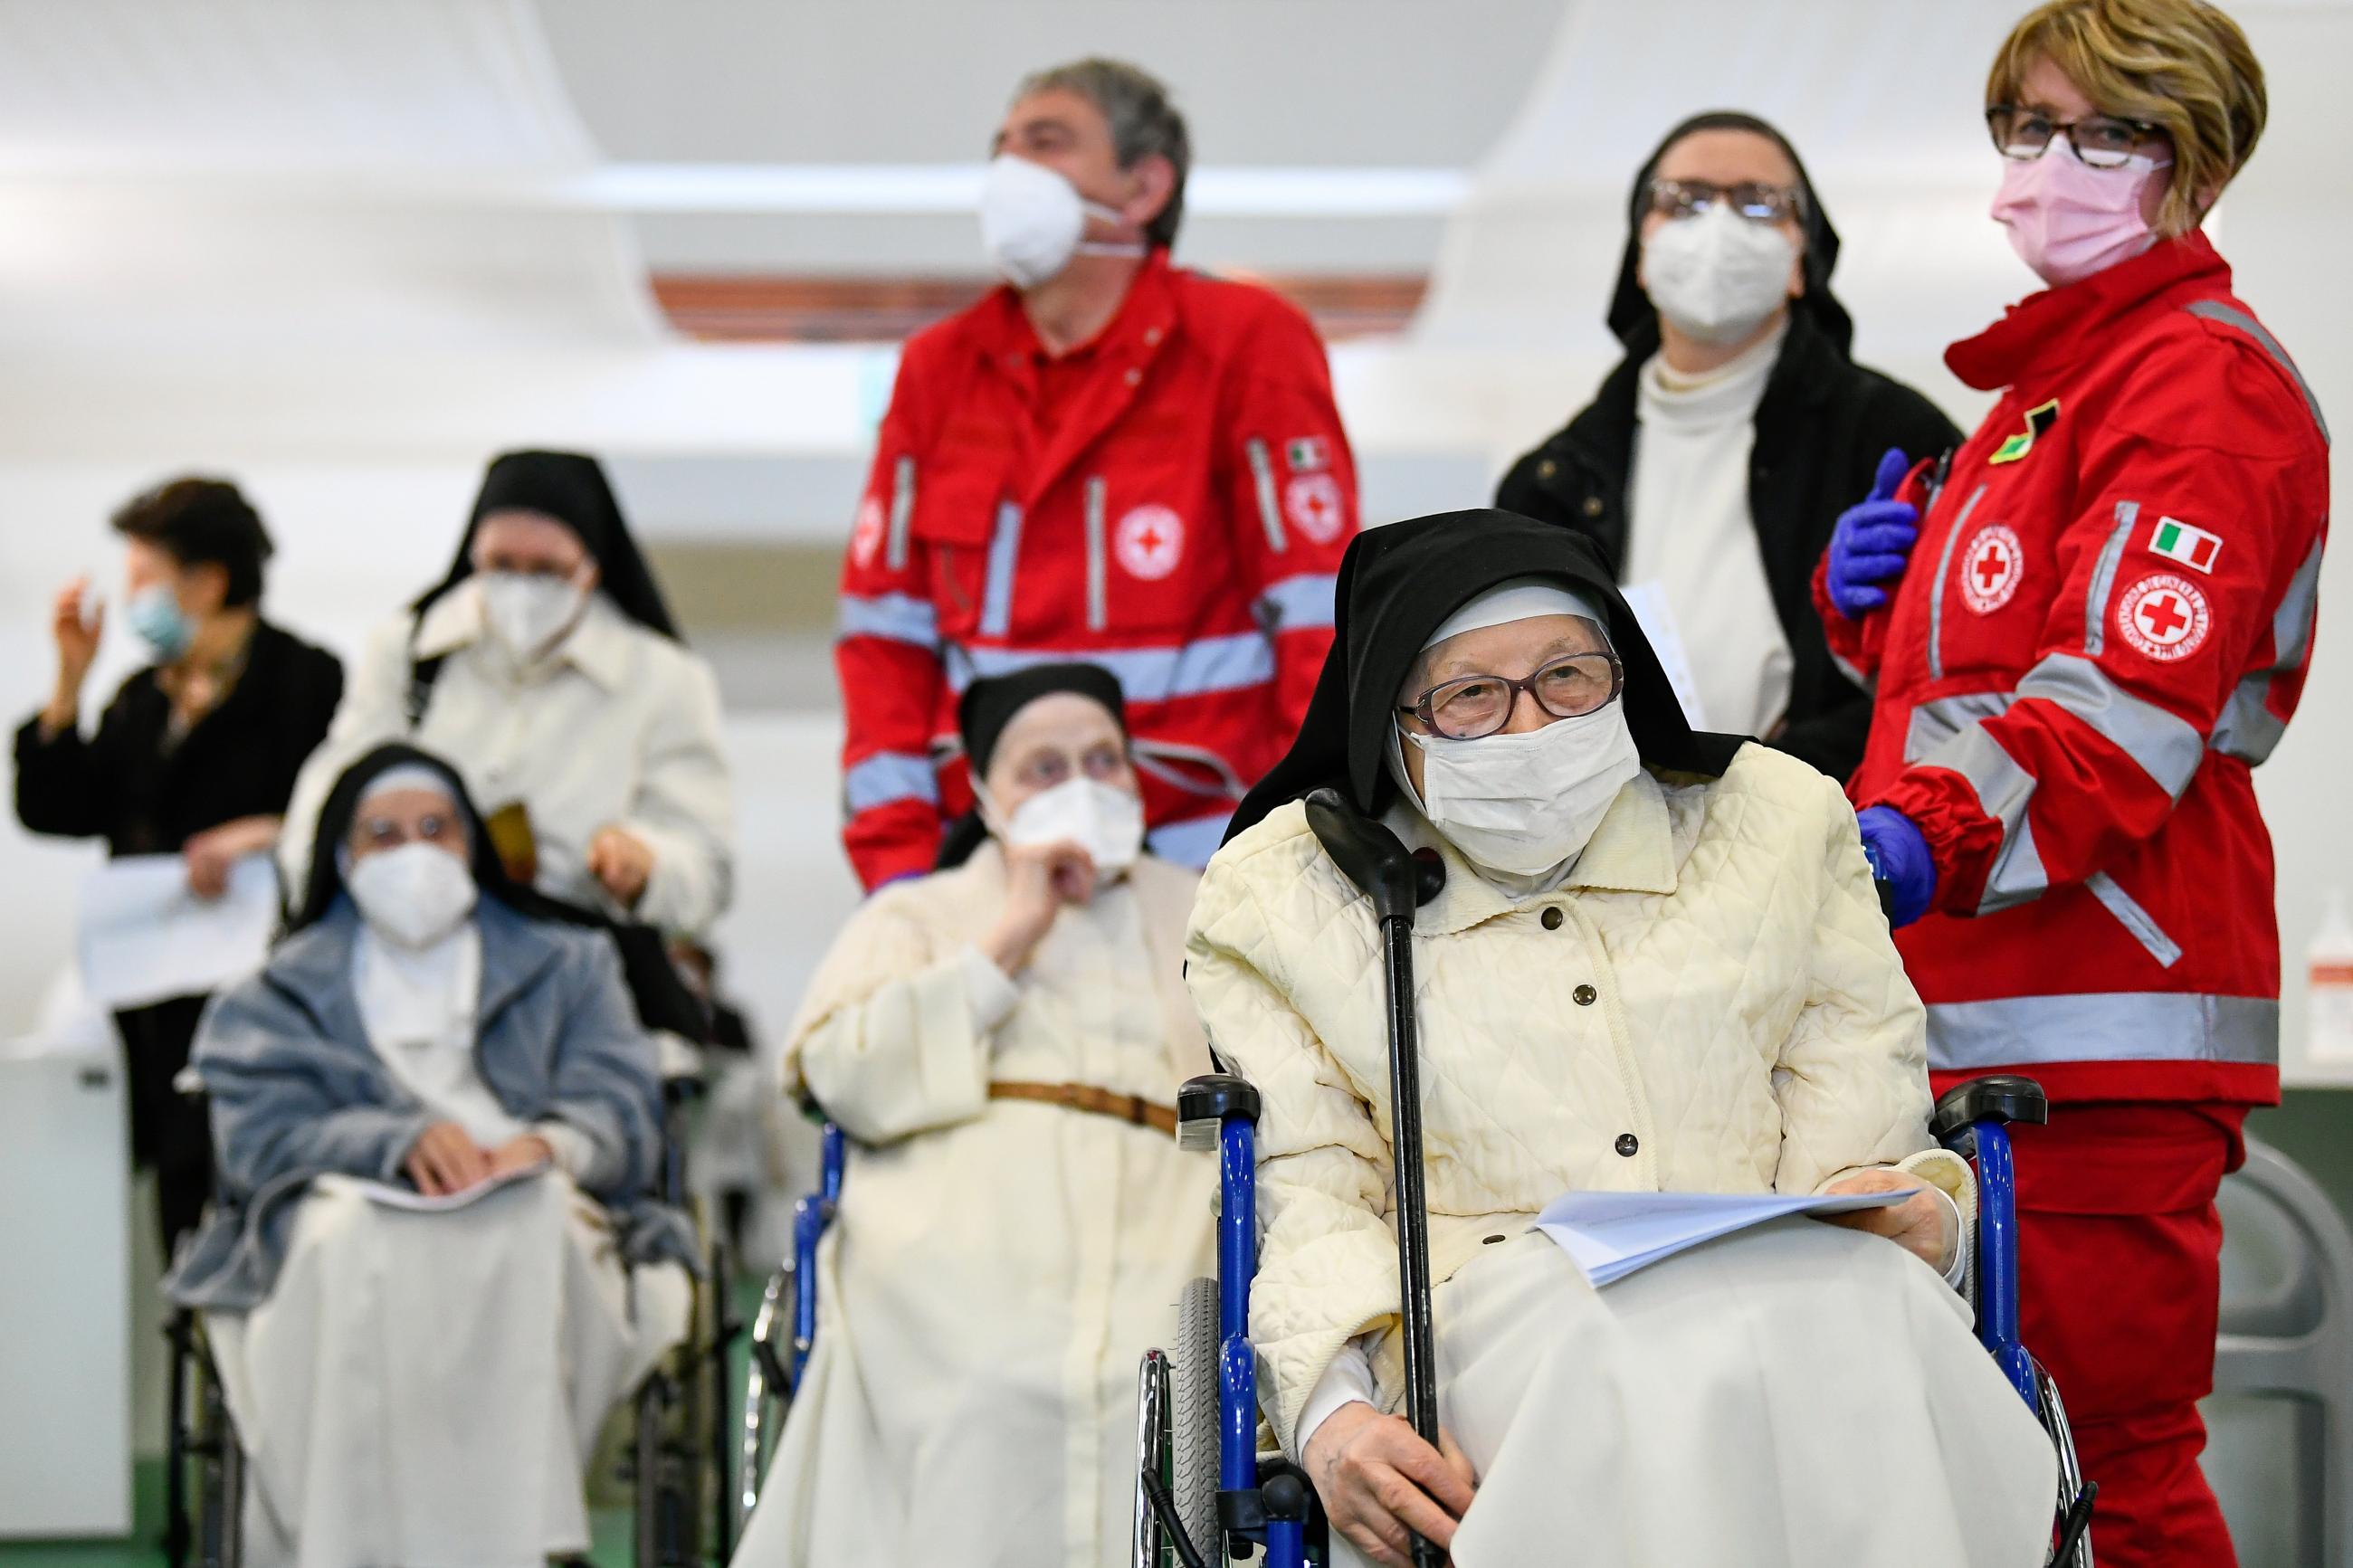 Members of the Red Cross stand next to nuns that wait to receive the coronavirus disease vaccine in Bergamo, Italy on March 1, 2021.